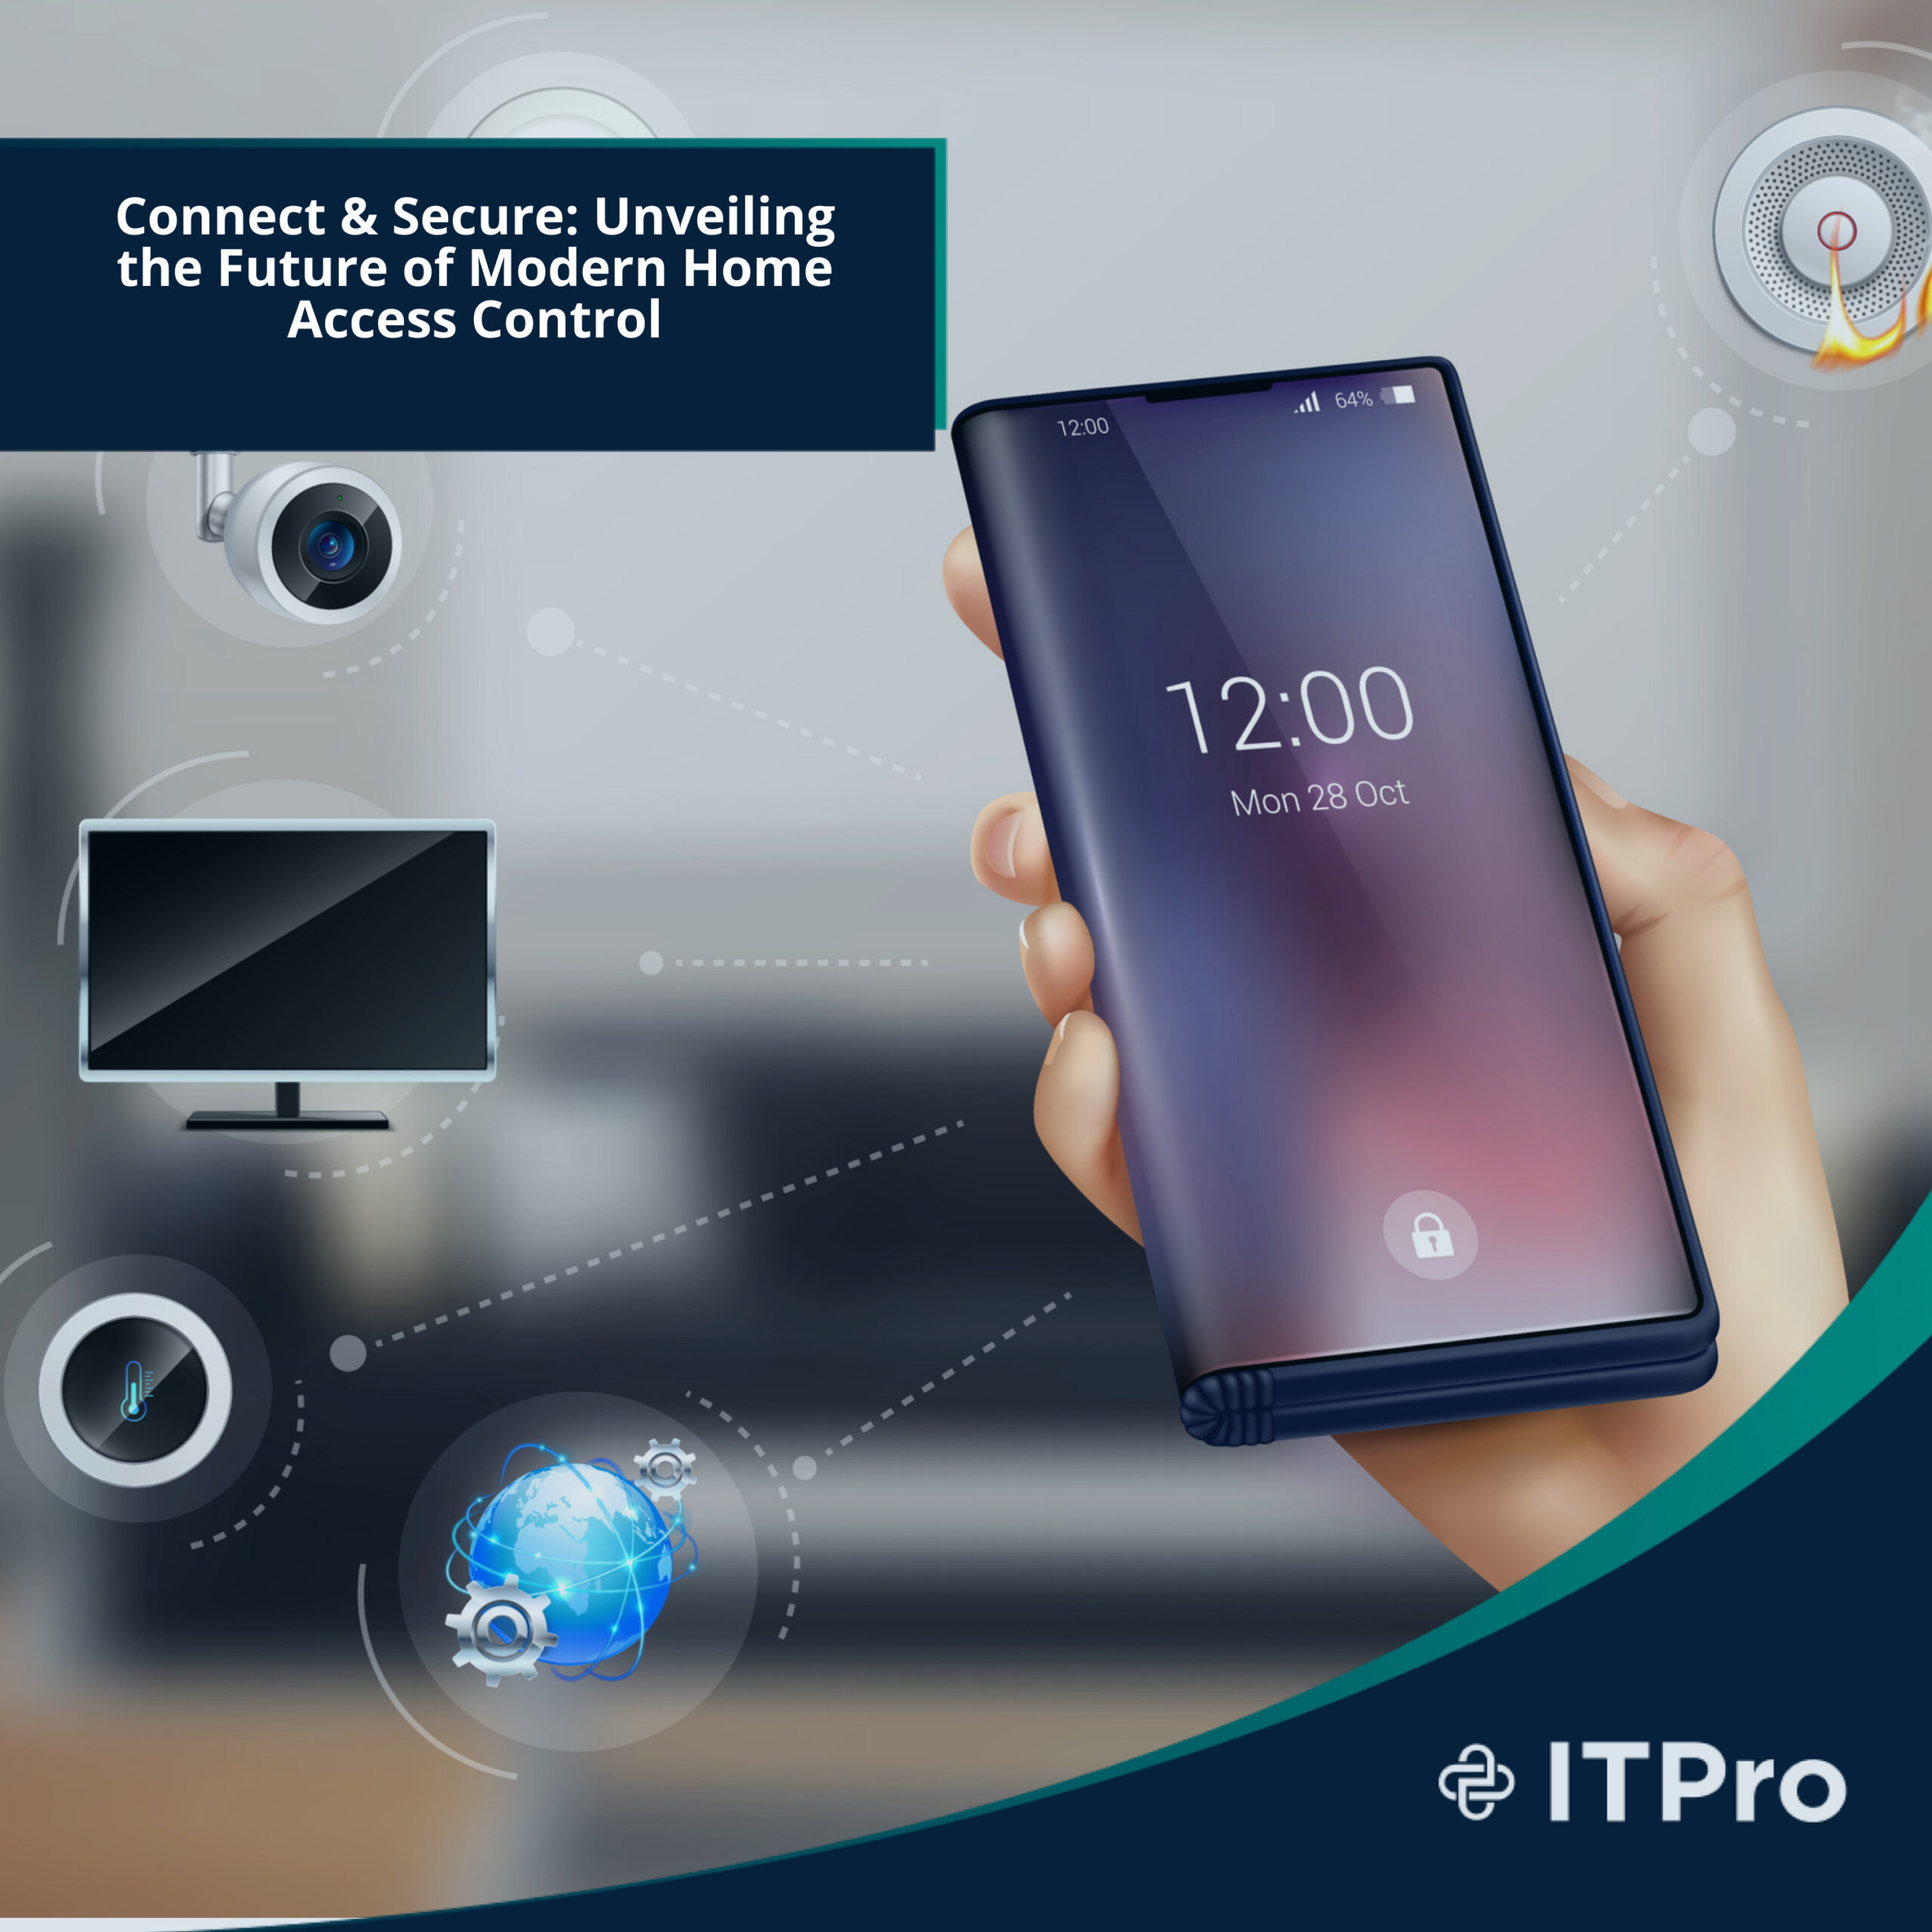 Connect & Secure: Unveiling the Future of Modern Home Access Control